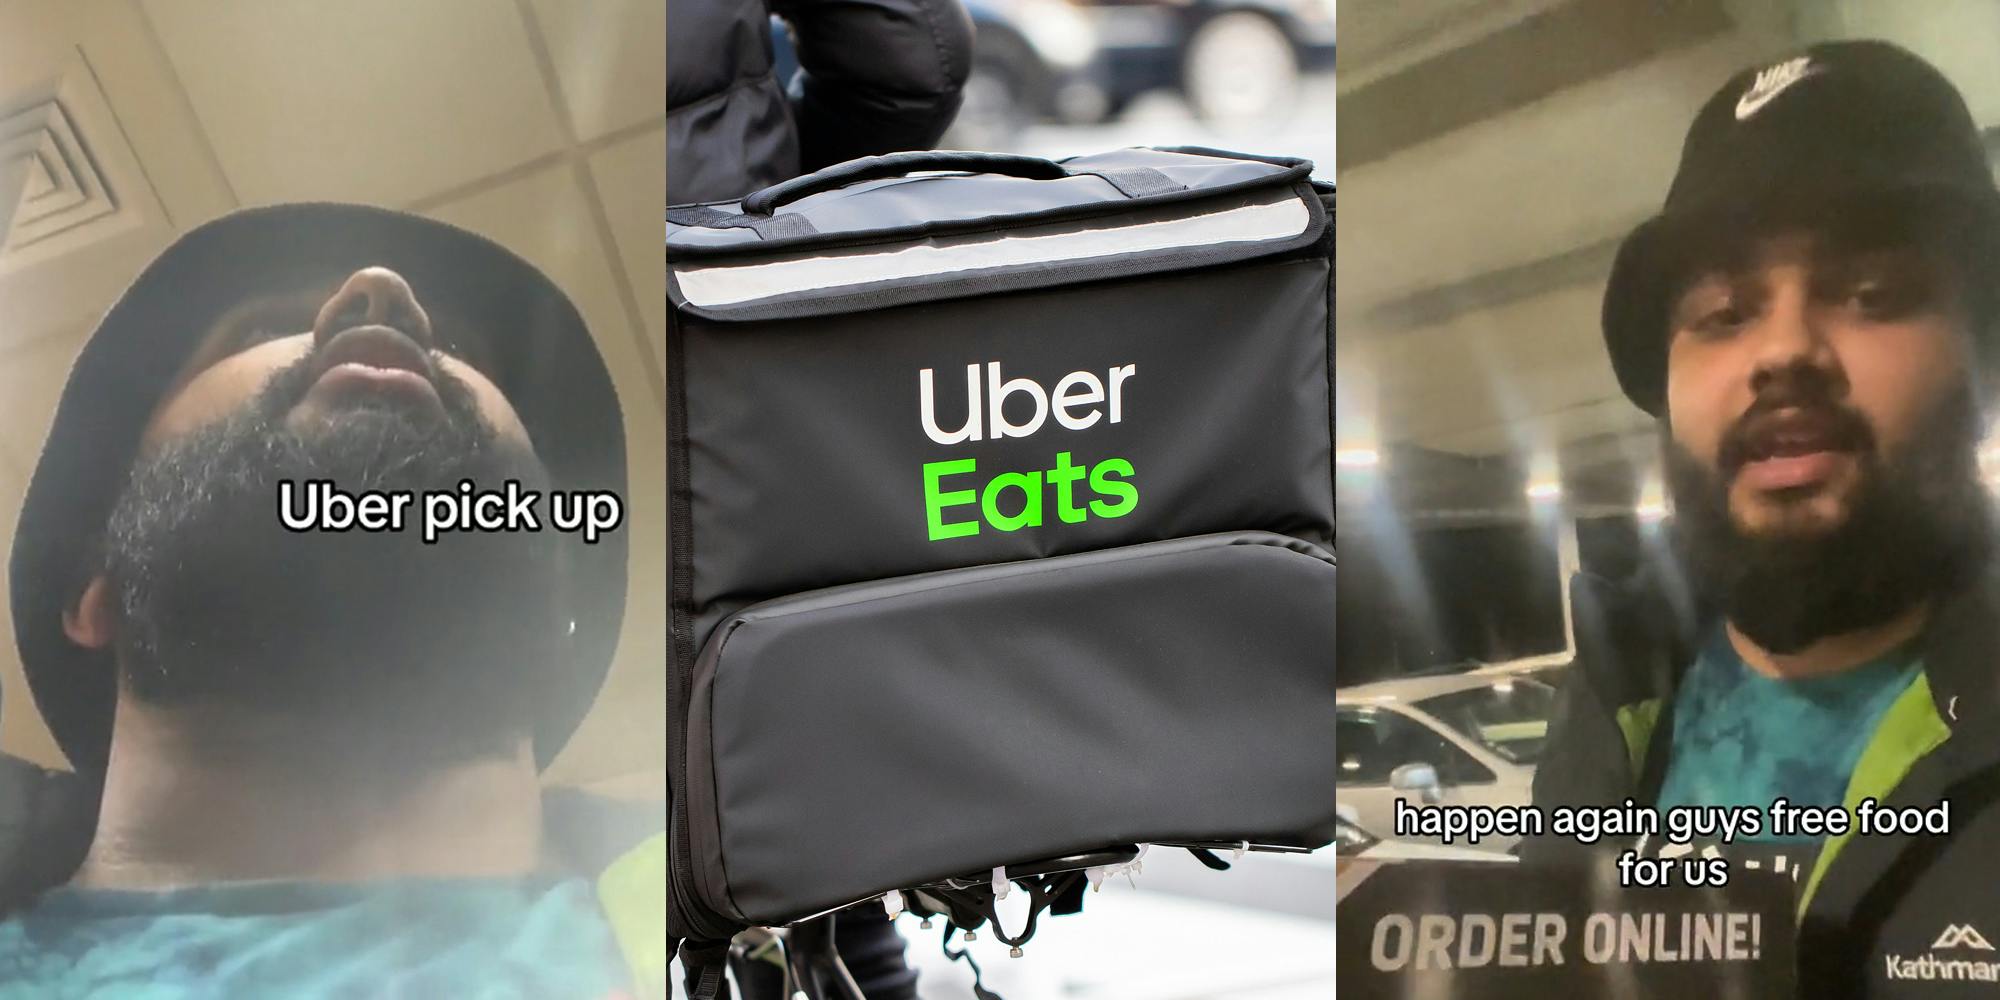 man in restaurant with caption "Uber pick up" (l) Uber Eats bag with logo (c) man holding food speaking with caption "happen again guys free food for us" (r)